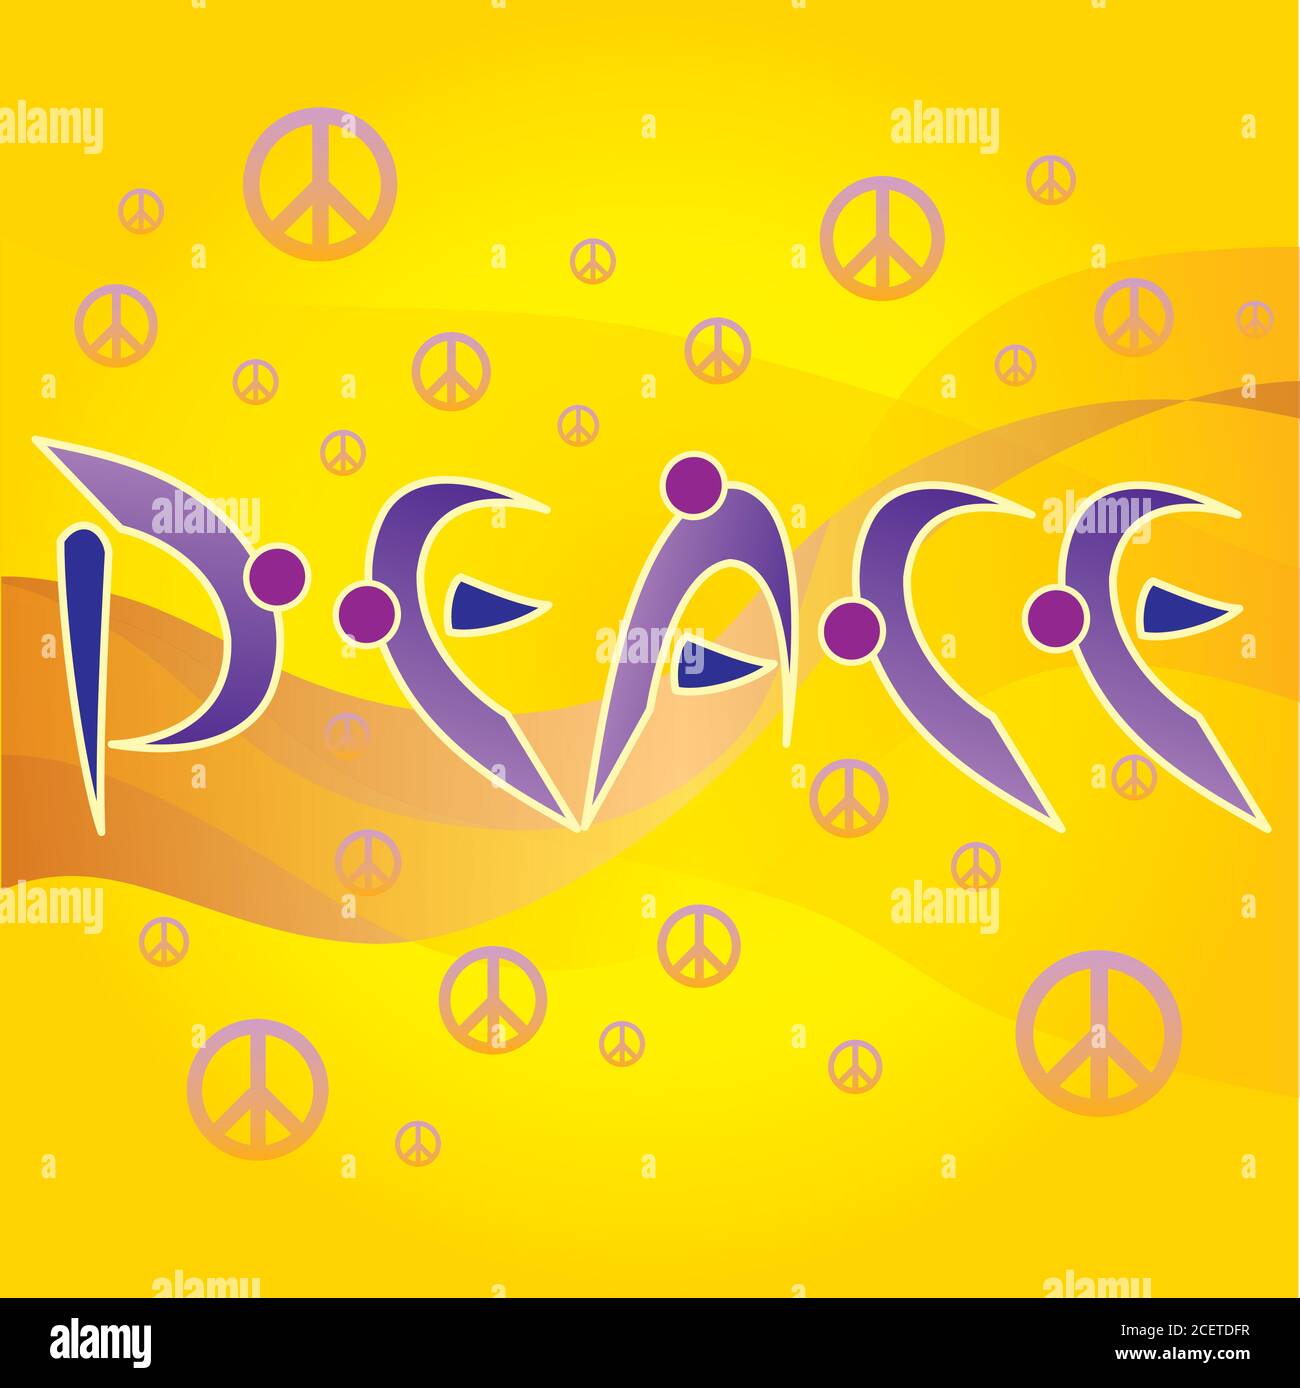 Peace Letters- Peace and Love Symbols and Abstract Person Icons Stock Vector